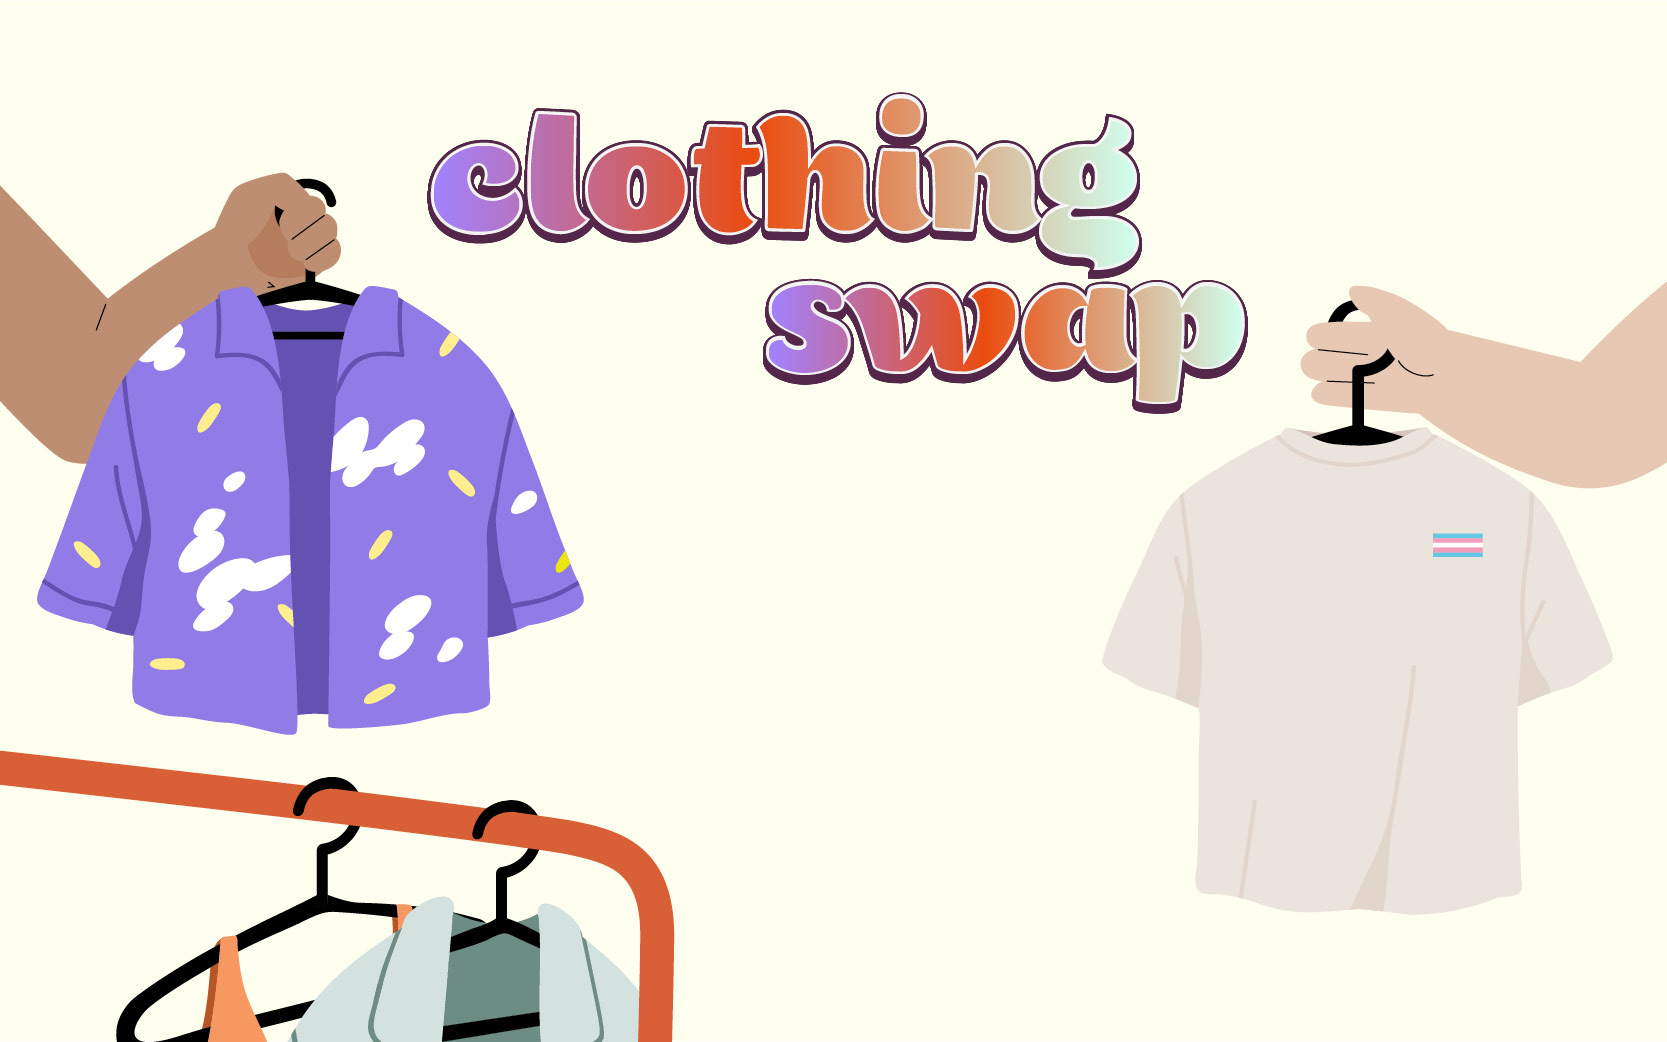 Flyer reads: Clothing Swap. Image of hands holding clothes. Clothes rack in bottom left.